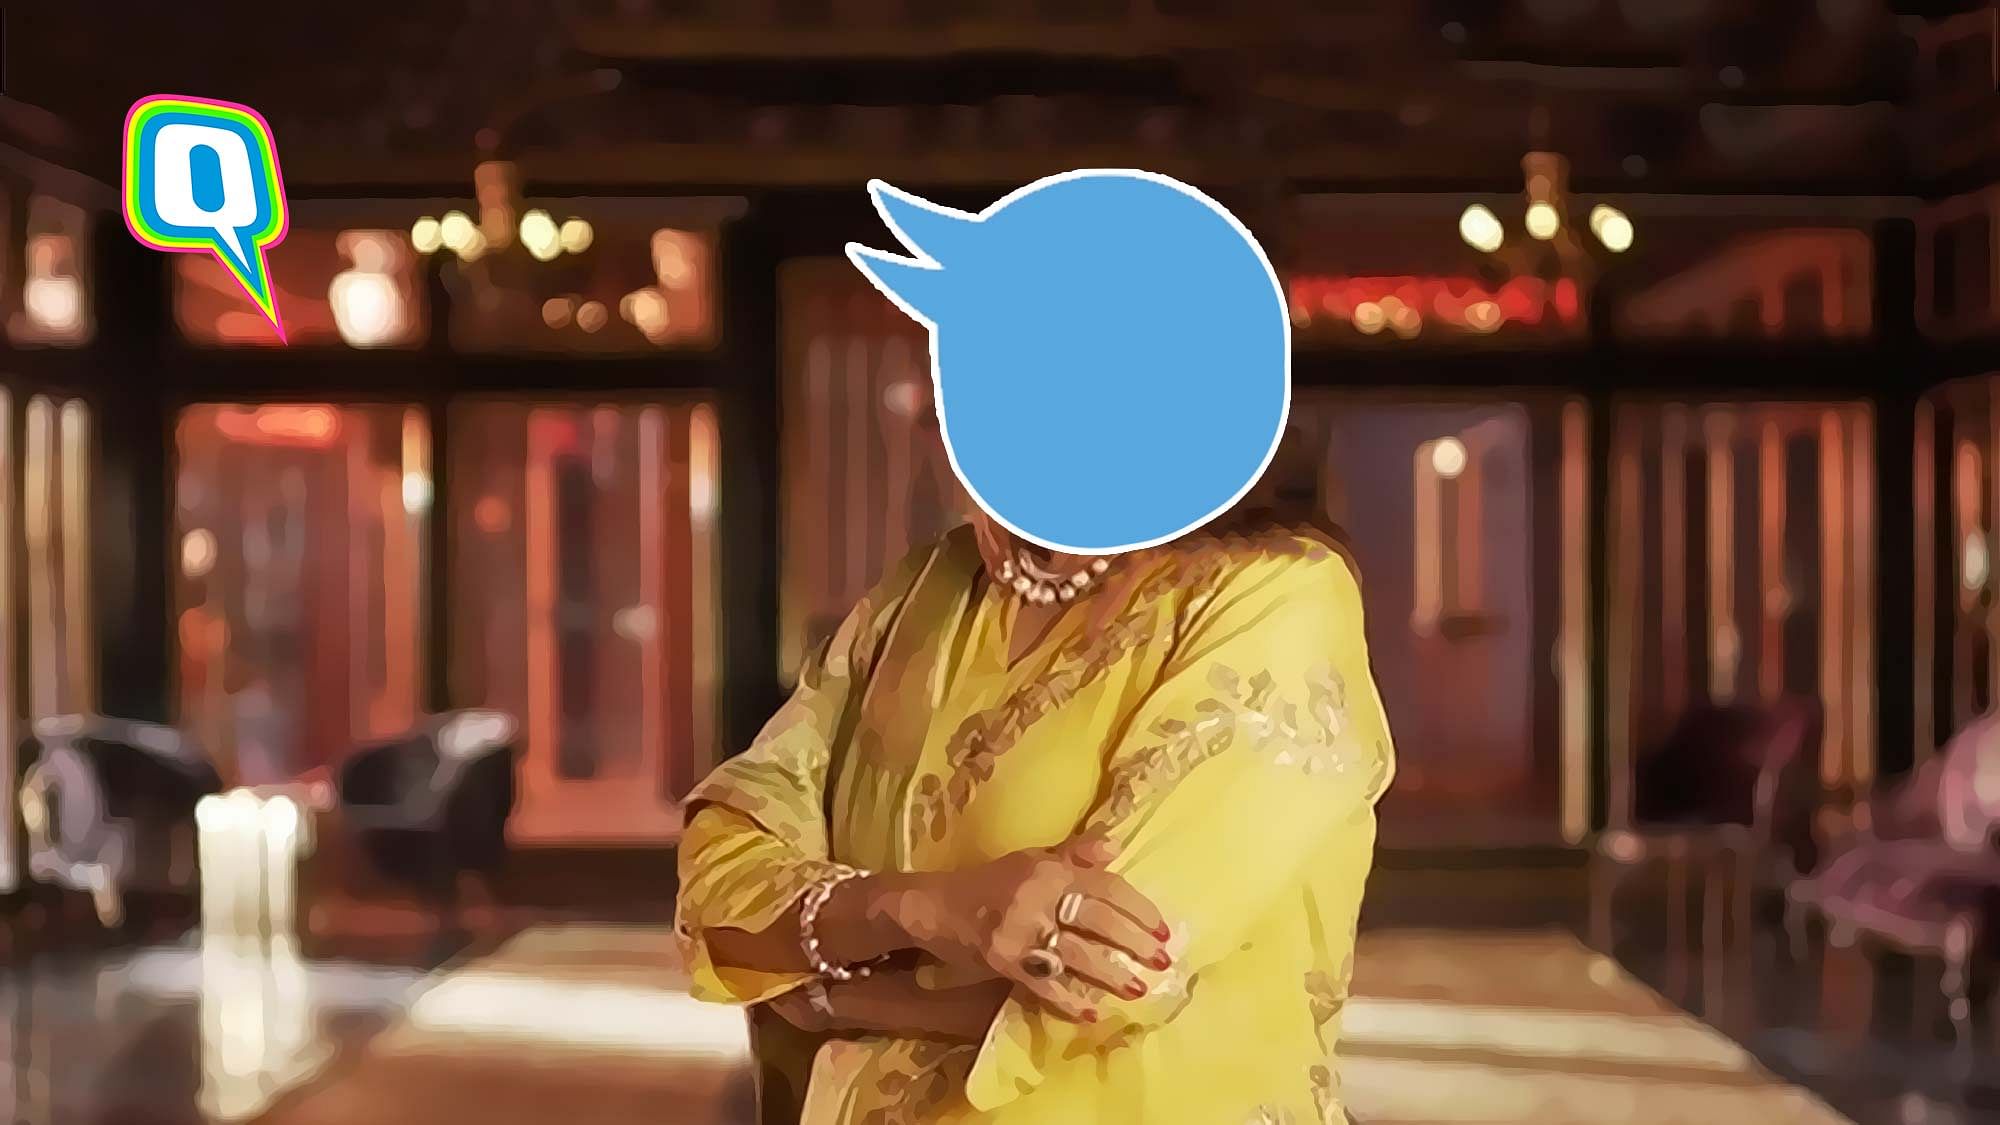 Who is nosier - Sima aunty or Twitter?